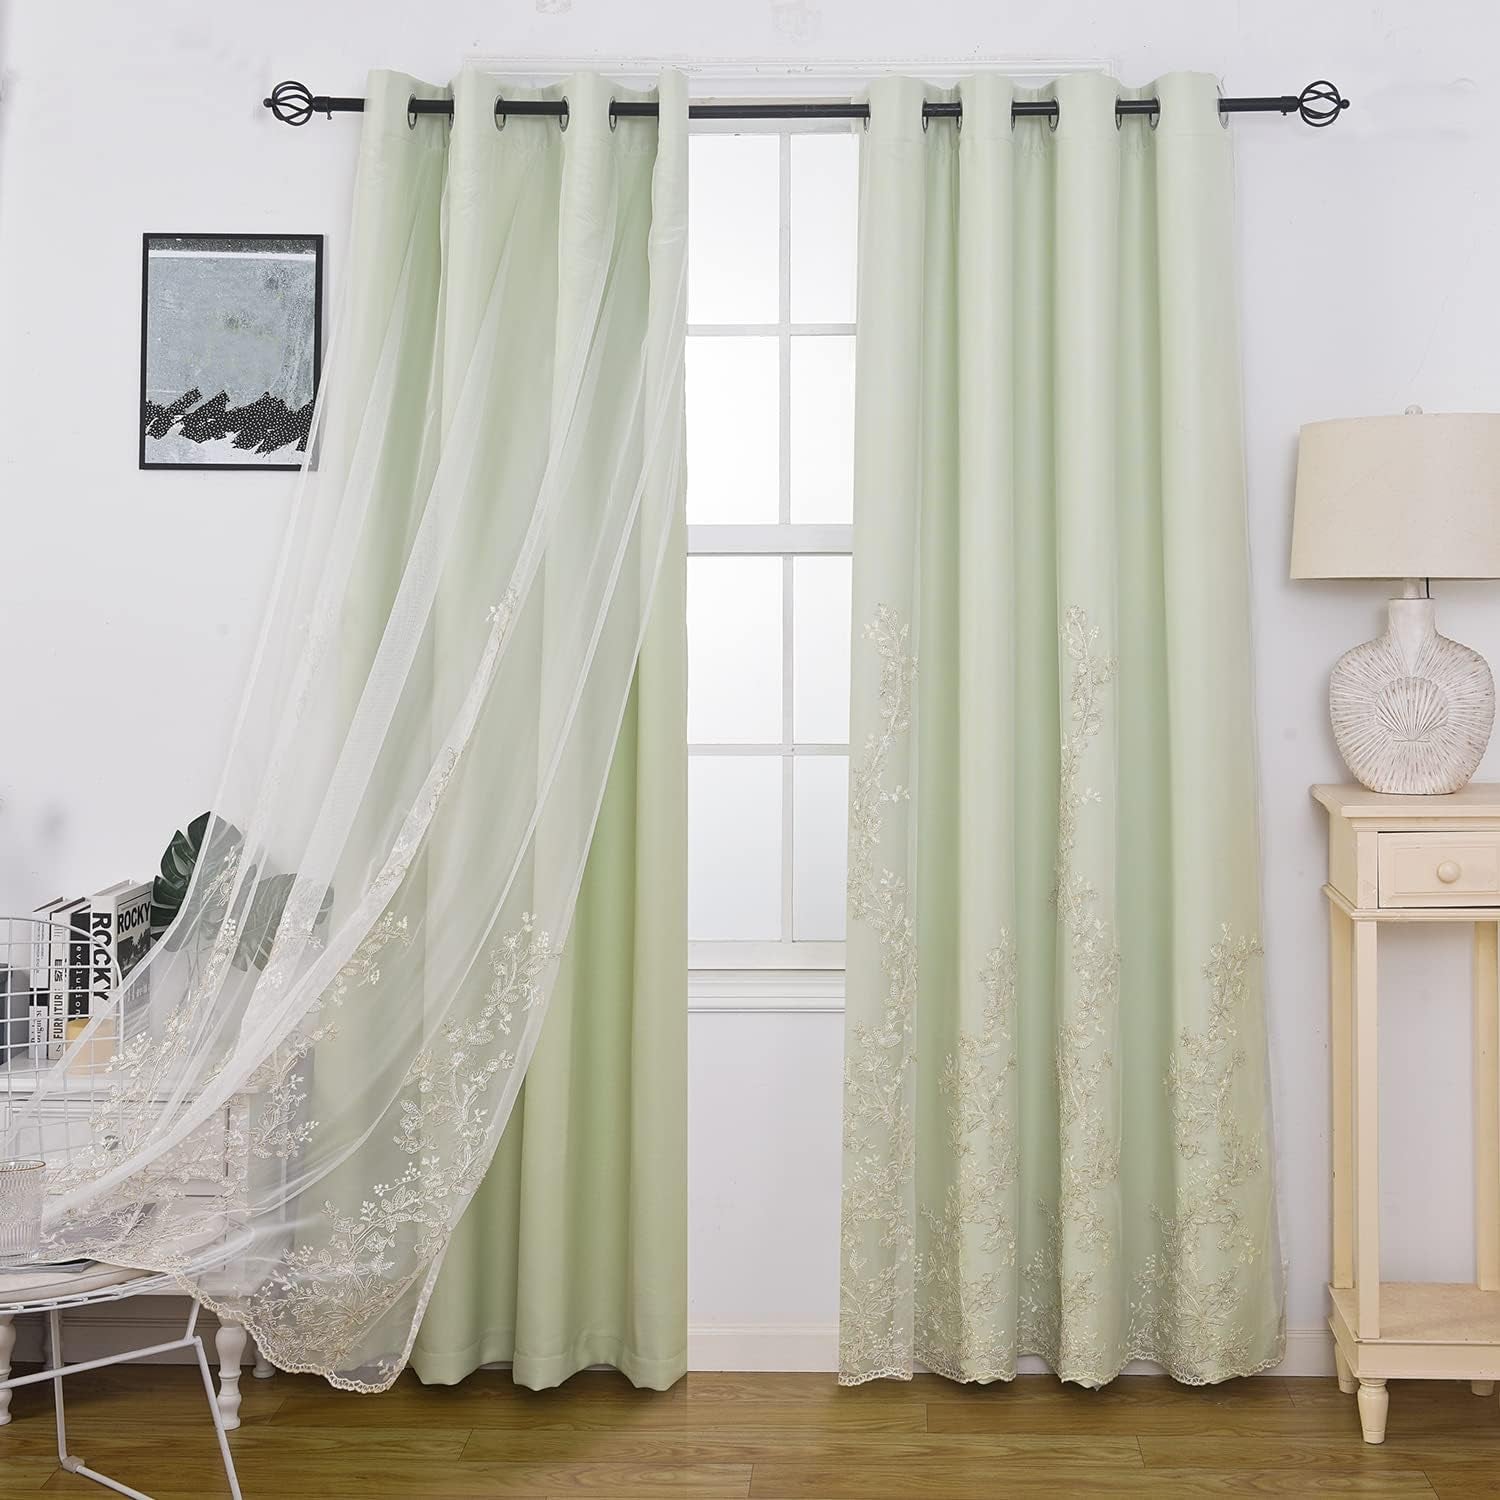 GYROHOME Double Layered Curtains with Embroidered White Sheer Tulle, Mix and Match Curtains Room Darkening Grommet Top Thermal Insulated Drapes,2Panels,52X84Inch,Beige  GYROHOME Sage Green 52Wx63Lx2 